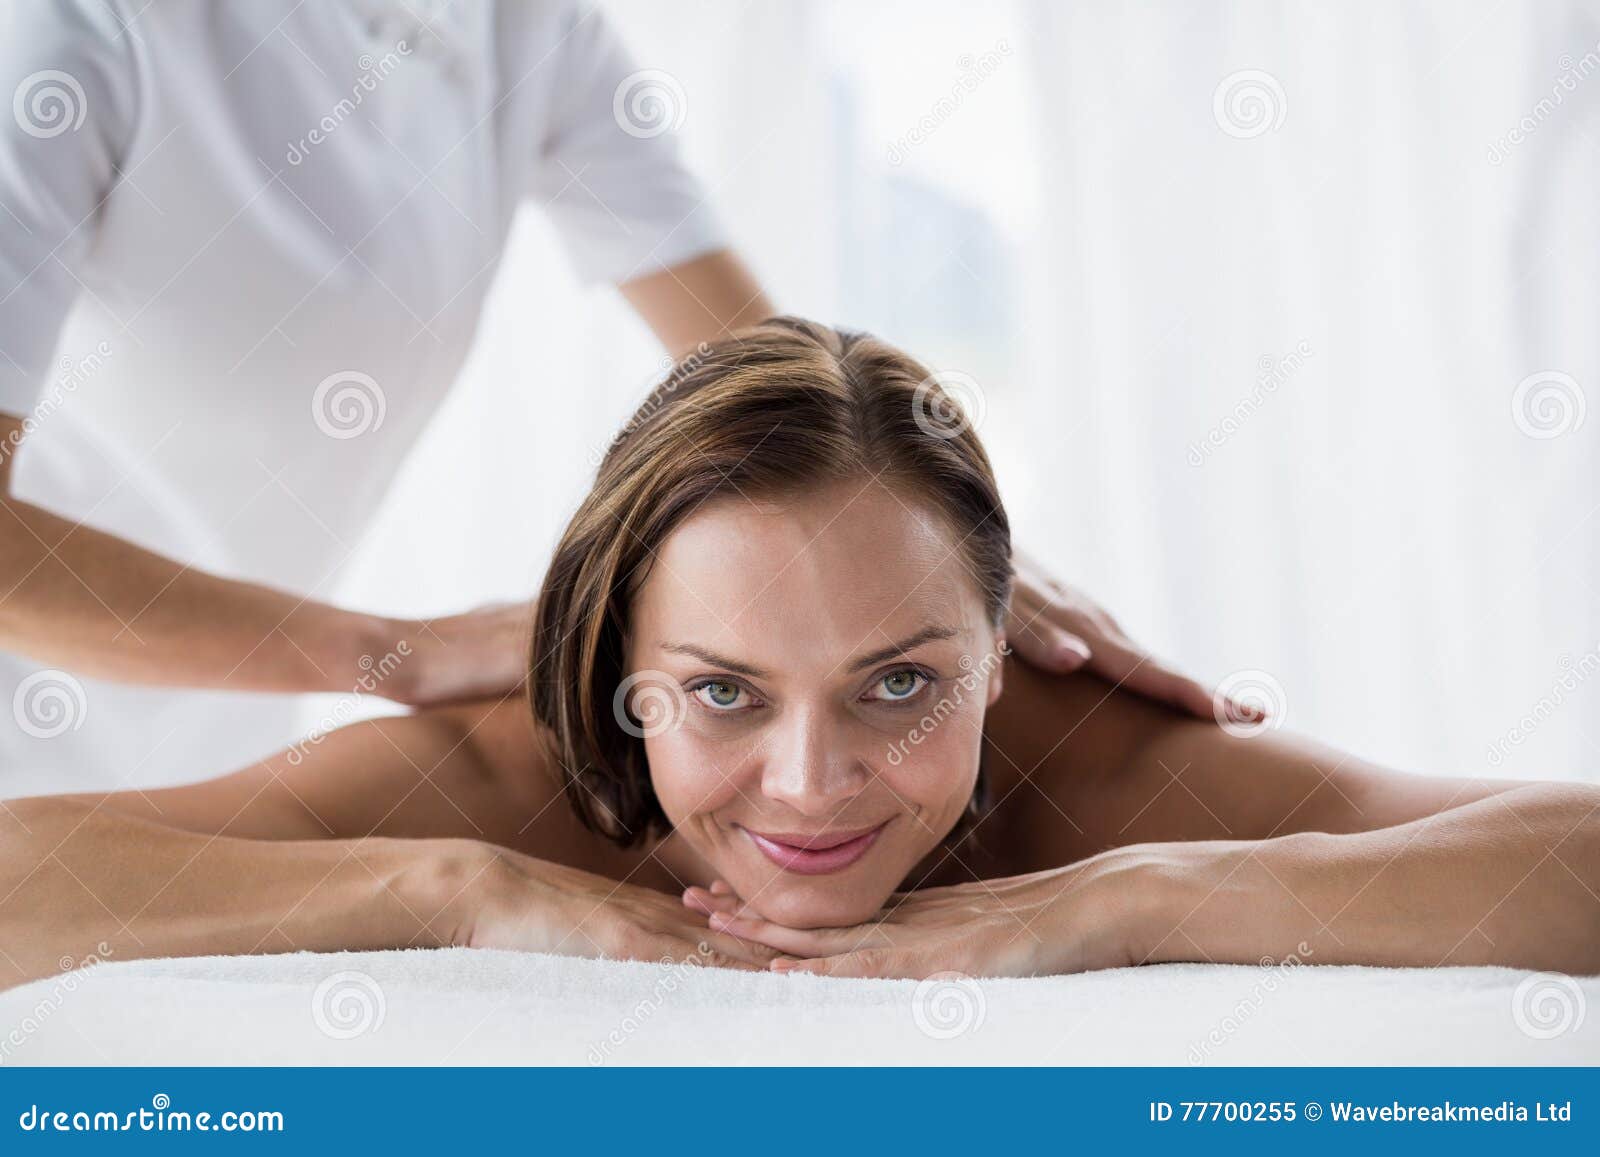 Portrait Of Smiling Woman Receiving Back Massage Stock Image Image Of